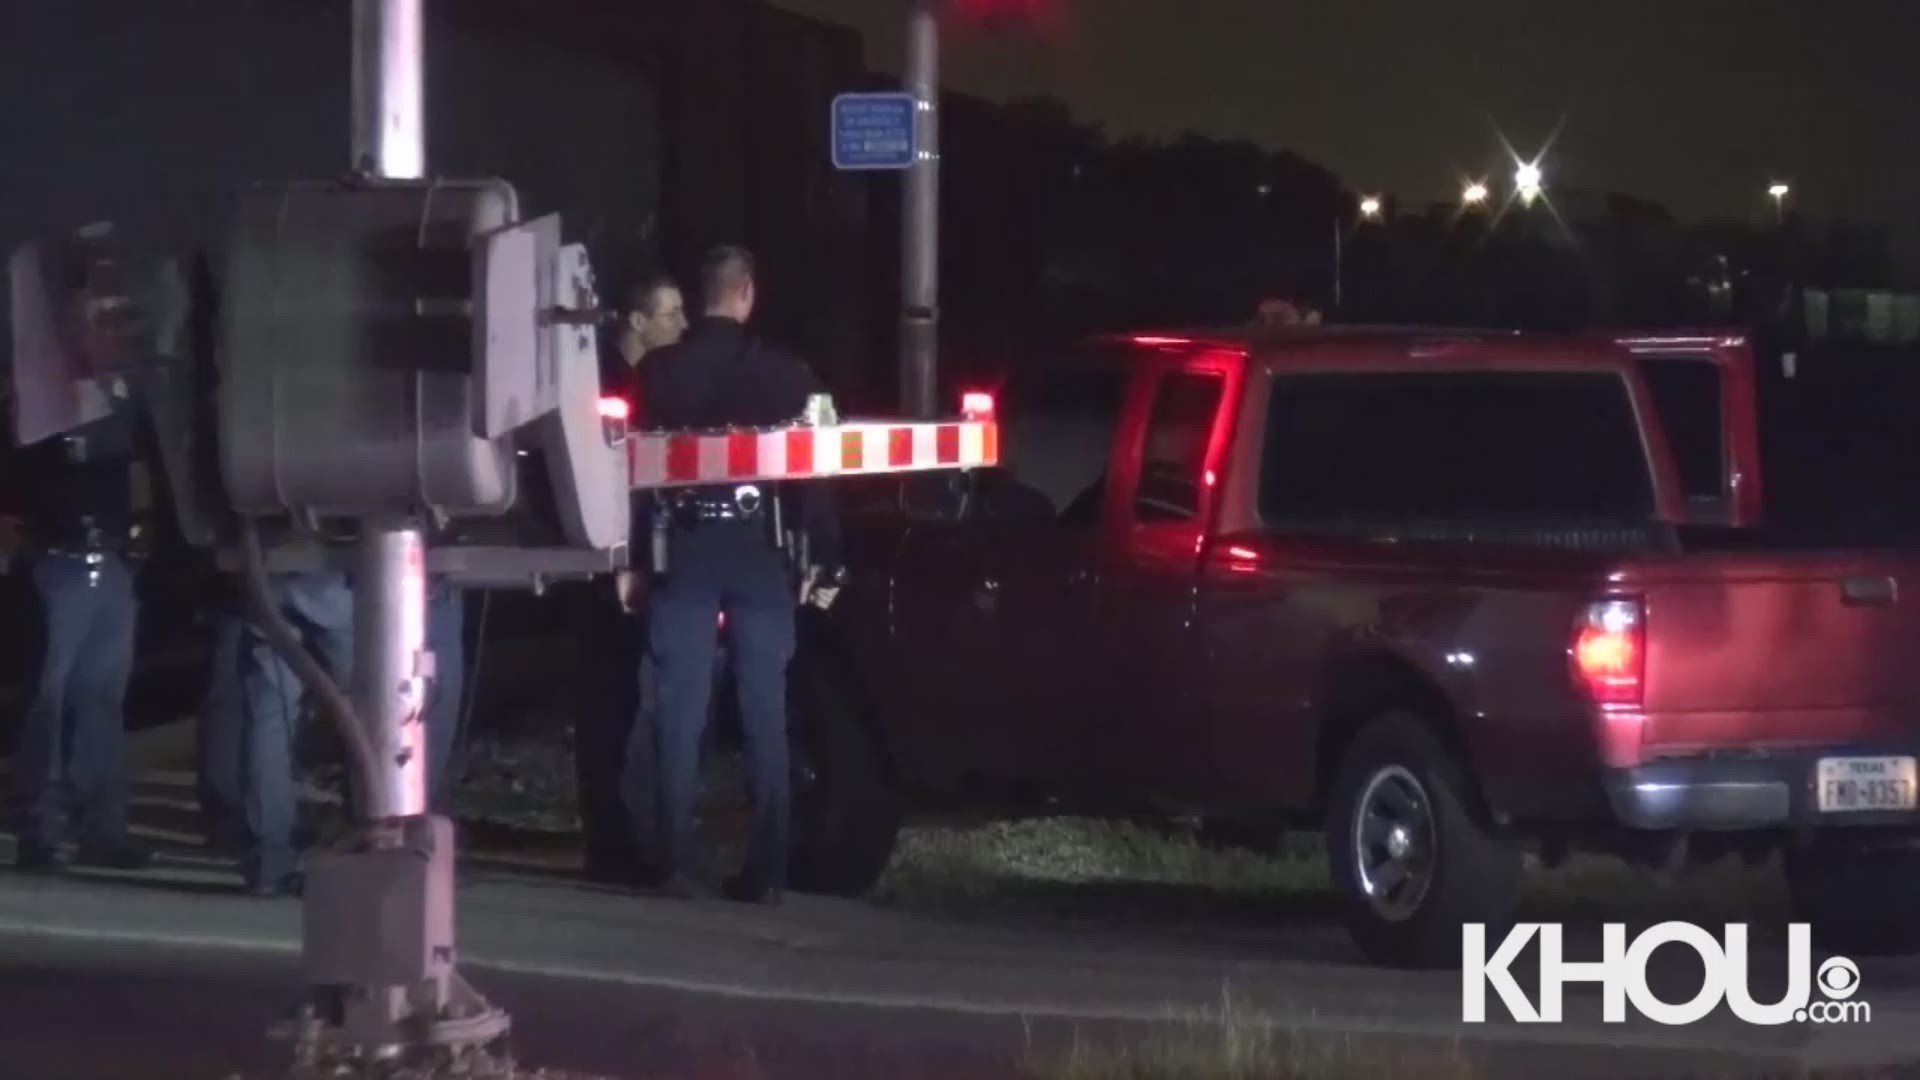 Raw video of an arrest after a chase suspect crashed into a train guard along Cavalcade and Elysian Street in northeast Houston.